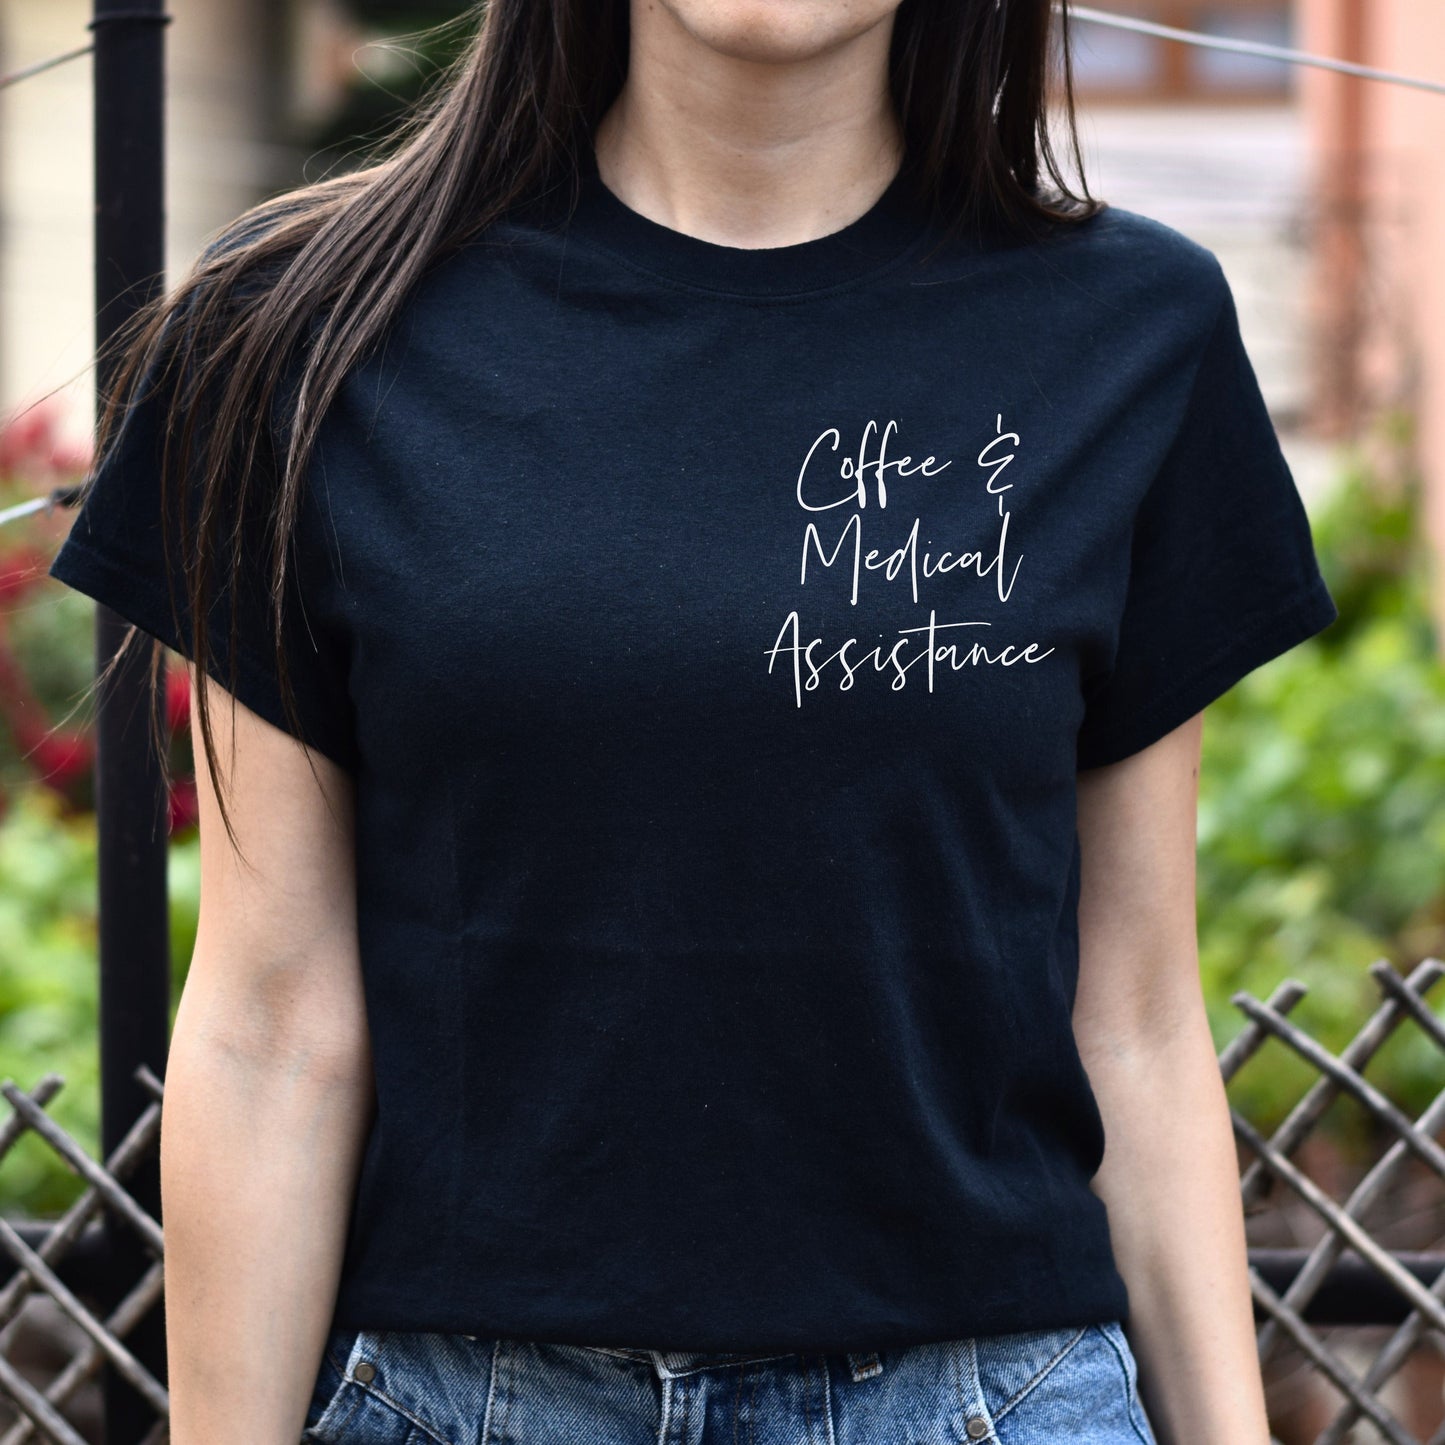 Coffee and medical assistance pocket Unisex T-shirt CMA tee Black Navy Dark Heather-Family-Gift-Planet